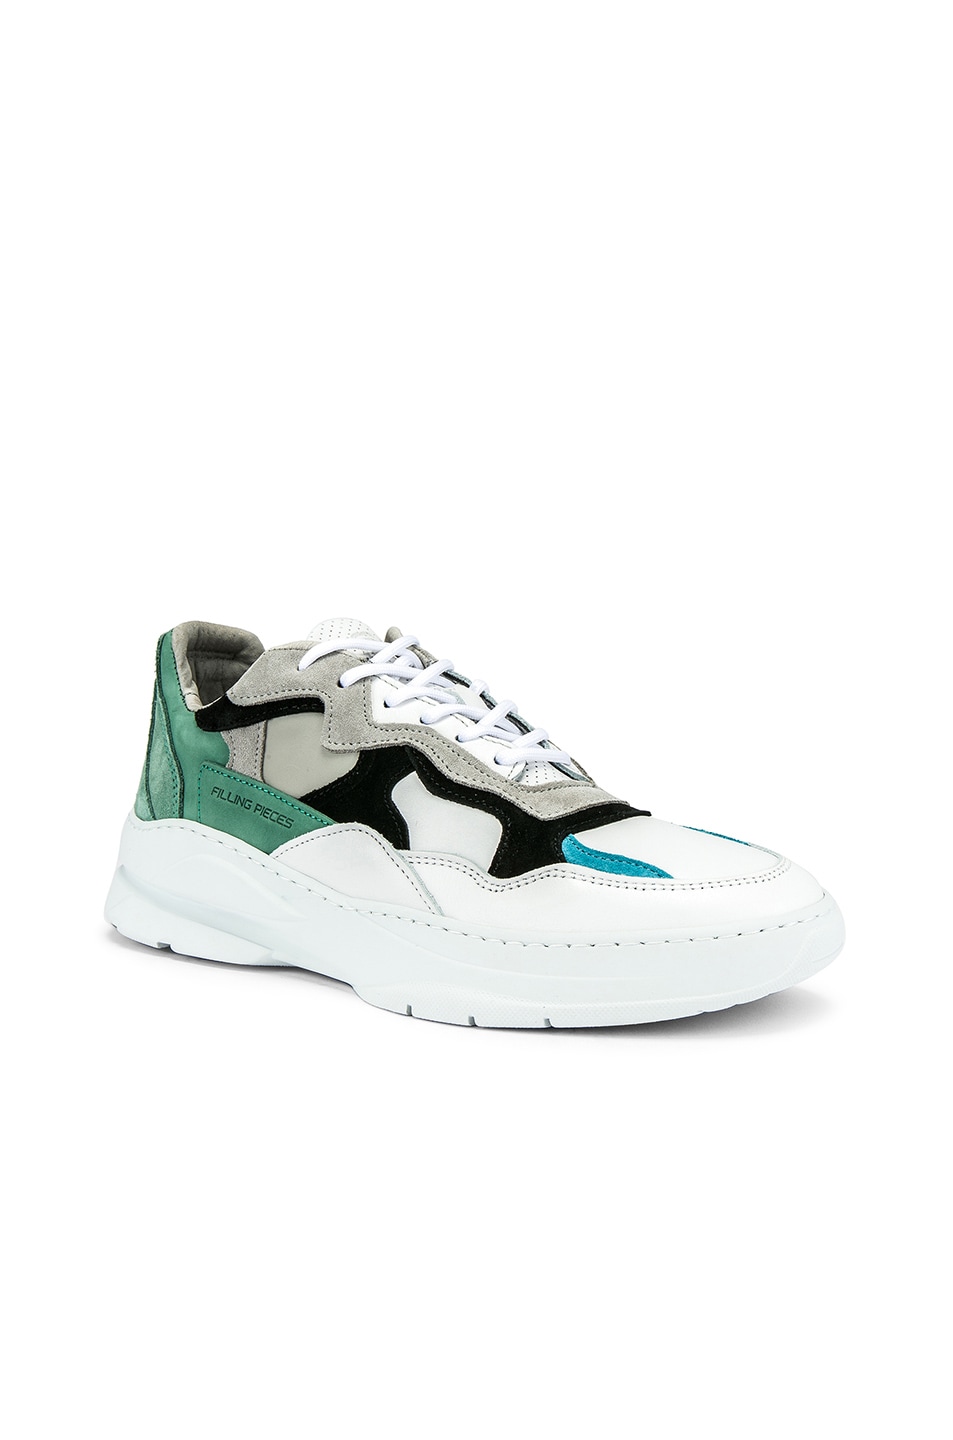 Image 1 of Filling Pieces Low Fade Cosmo Infinity in Mint